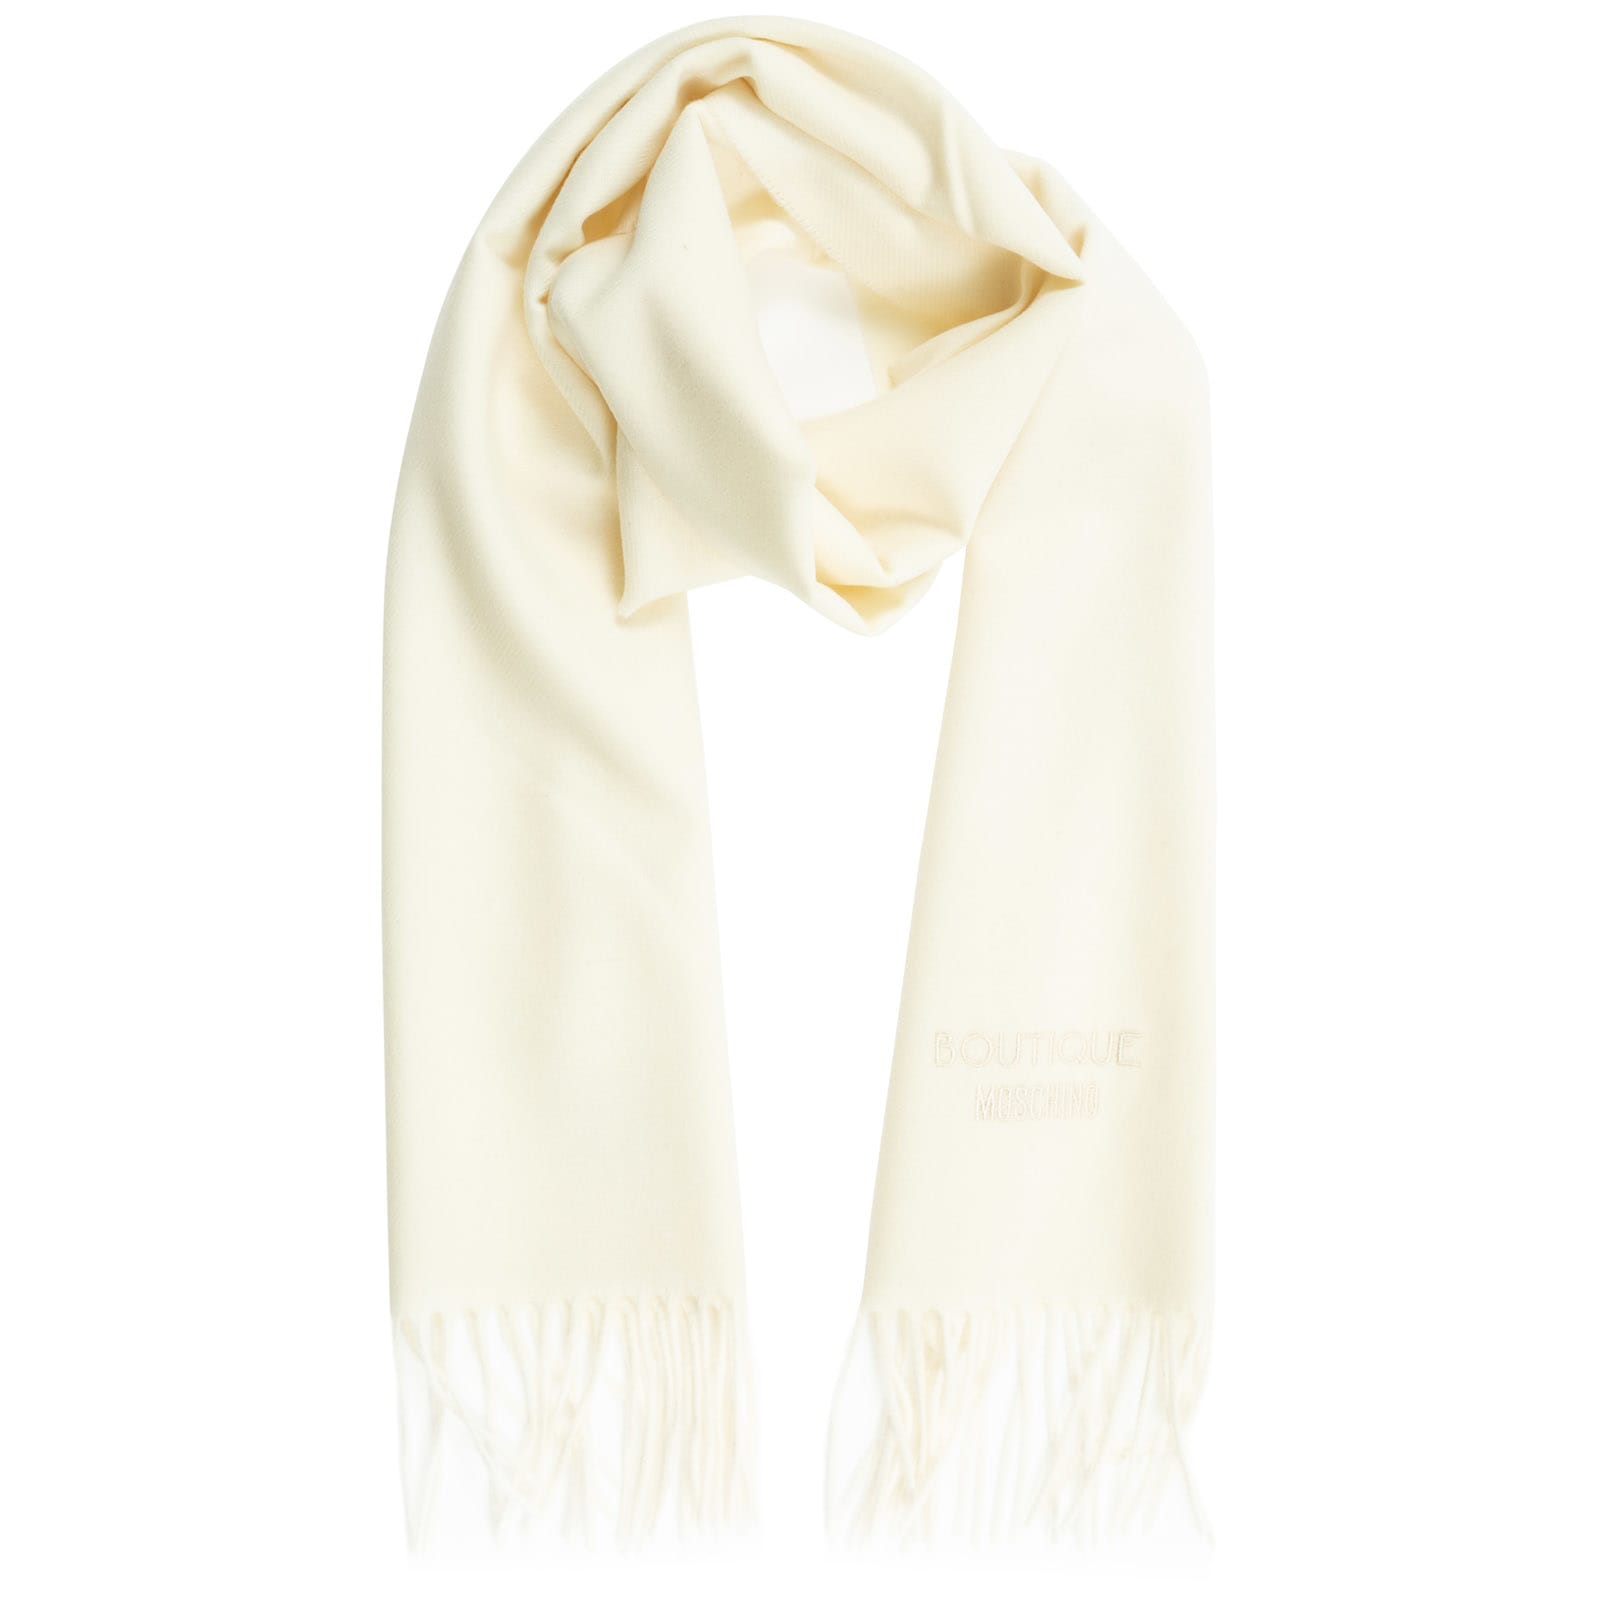 Boutique Moschino Royal Rebellion Wool Scarf